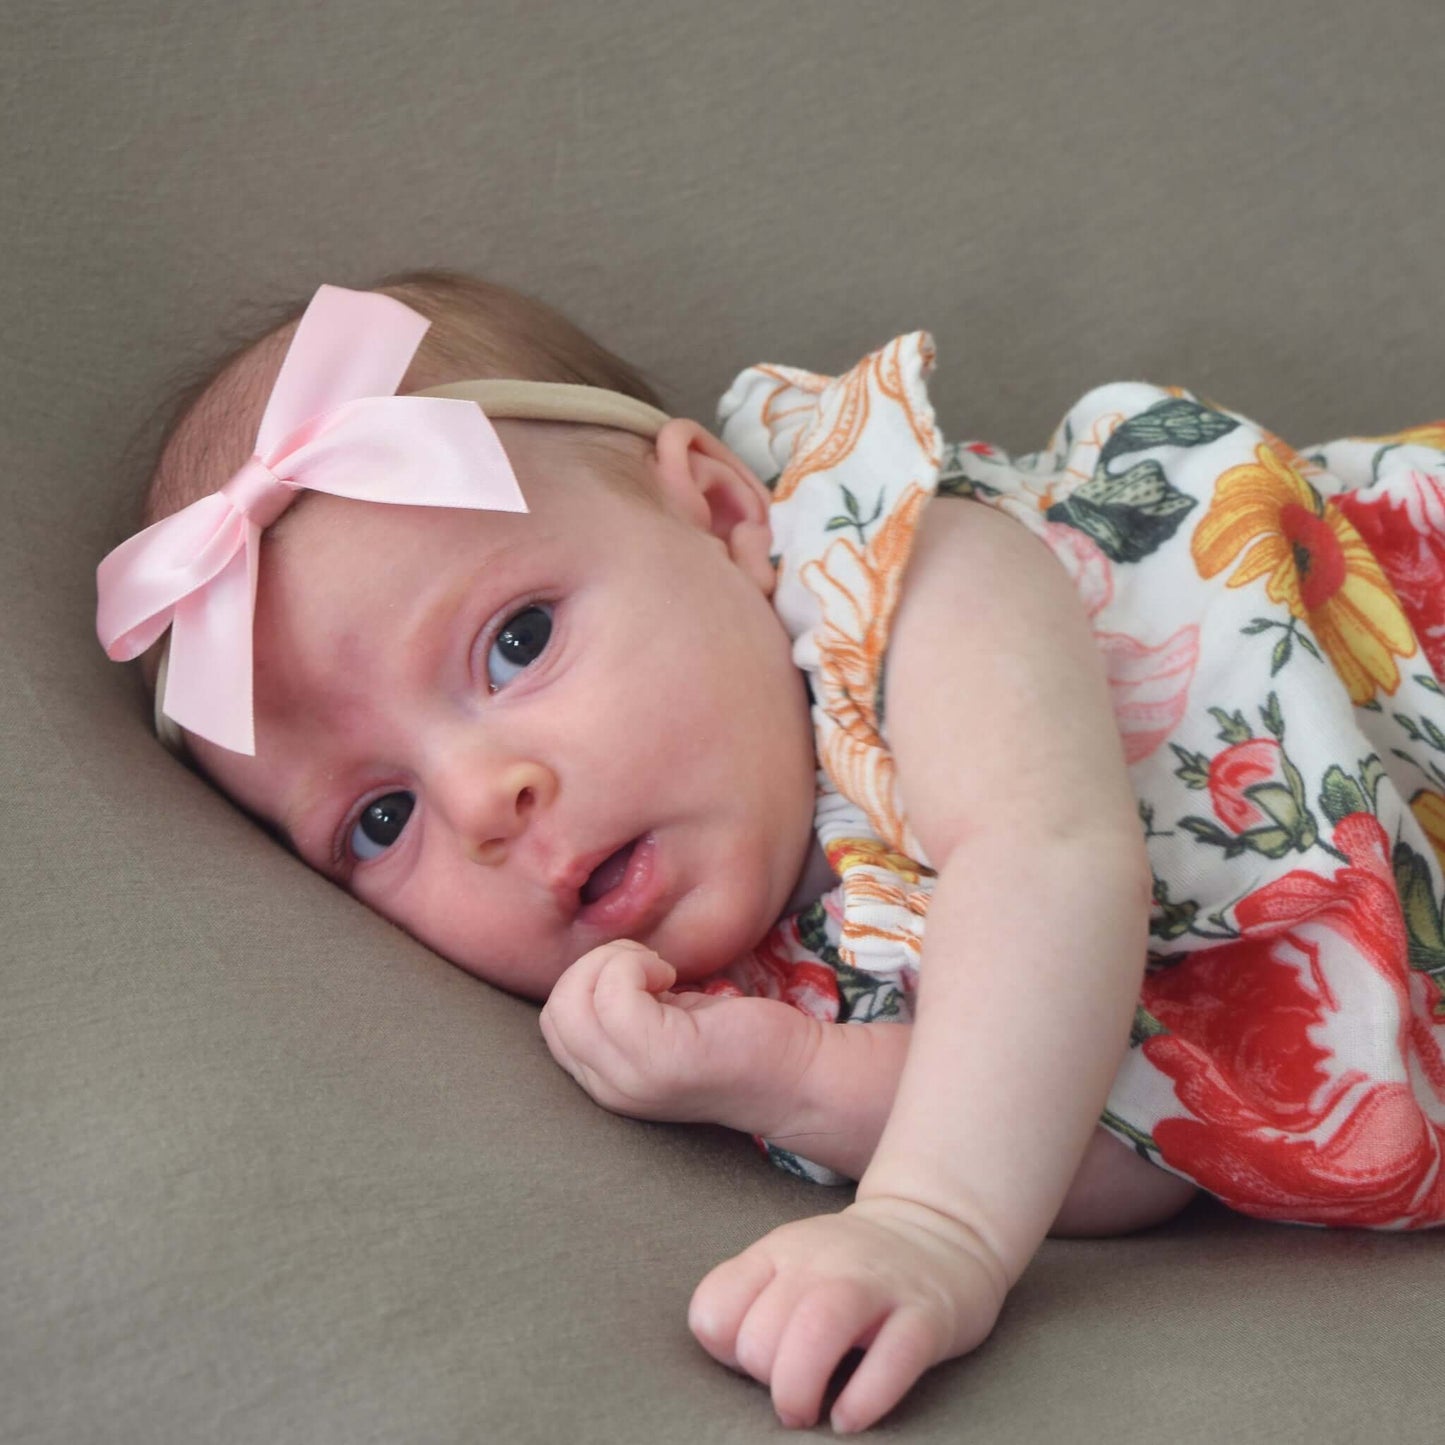 Baby wearing floral dress and pink grosgrain sailor bow headband lies on taupe background